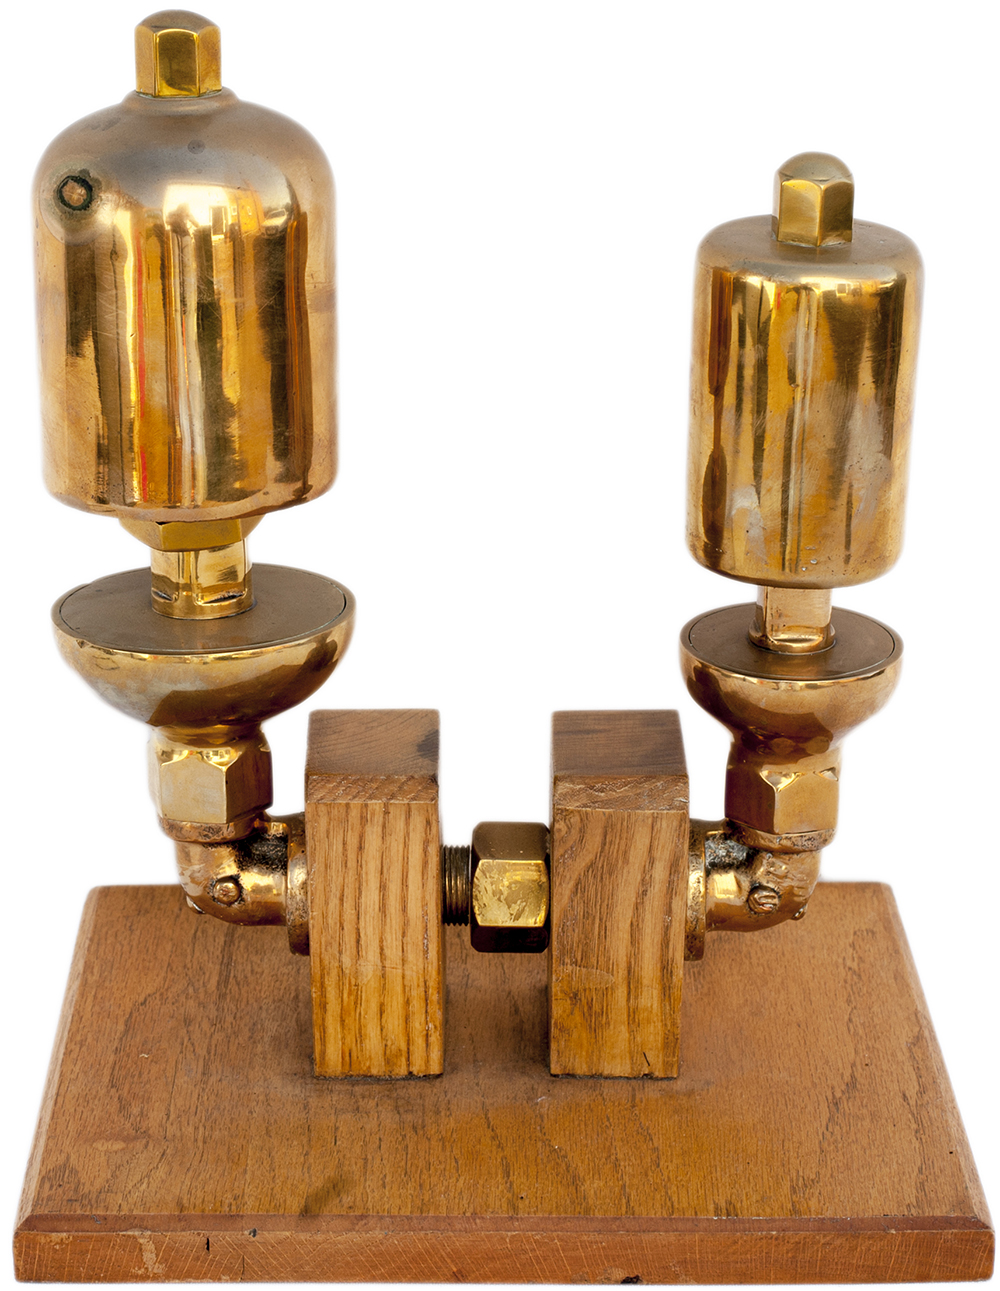 GWR brass locomotive whistles large and small tastefully mounted on an oak display stand.